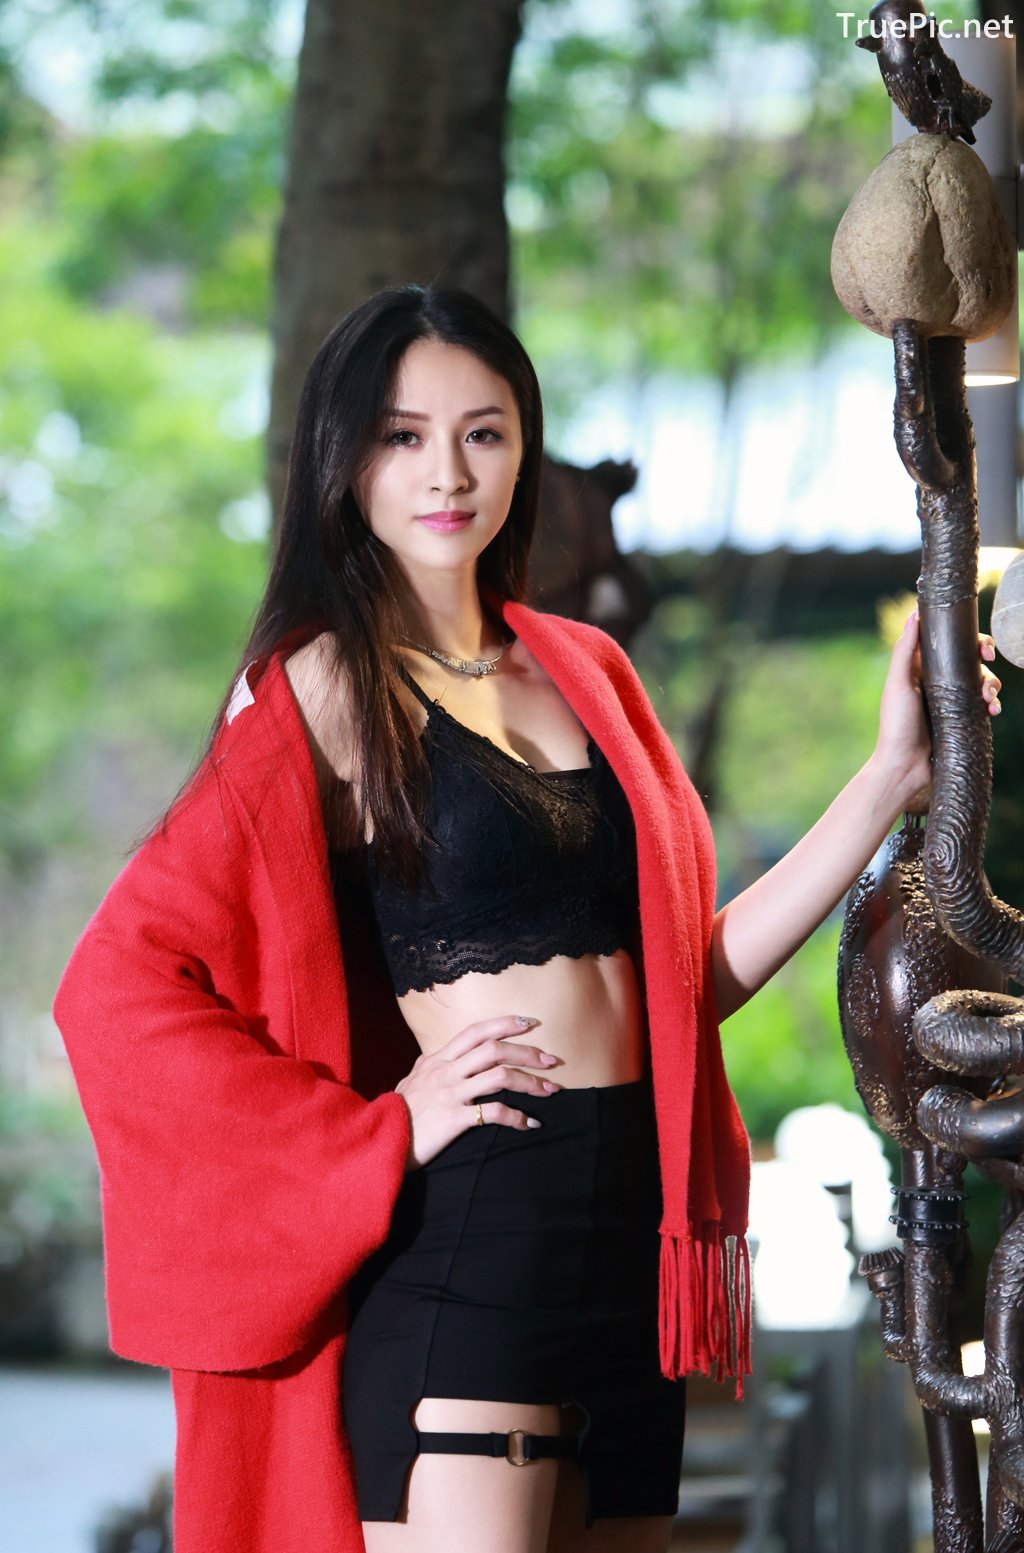 Image-Taiwanese-Beautiful-Long-Legs-Girl-雪岑Lola-Black-Sexy-Short-Pants-and-Crop-Top-Outfit-TruePic.net- Picture-45